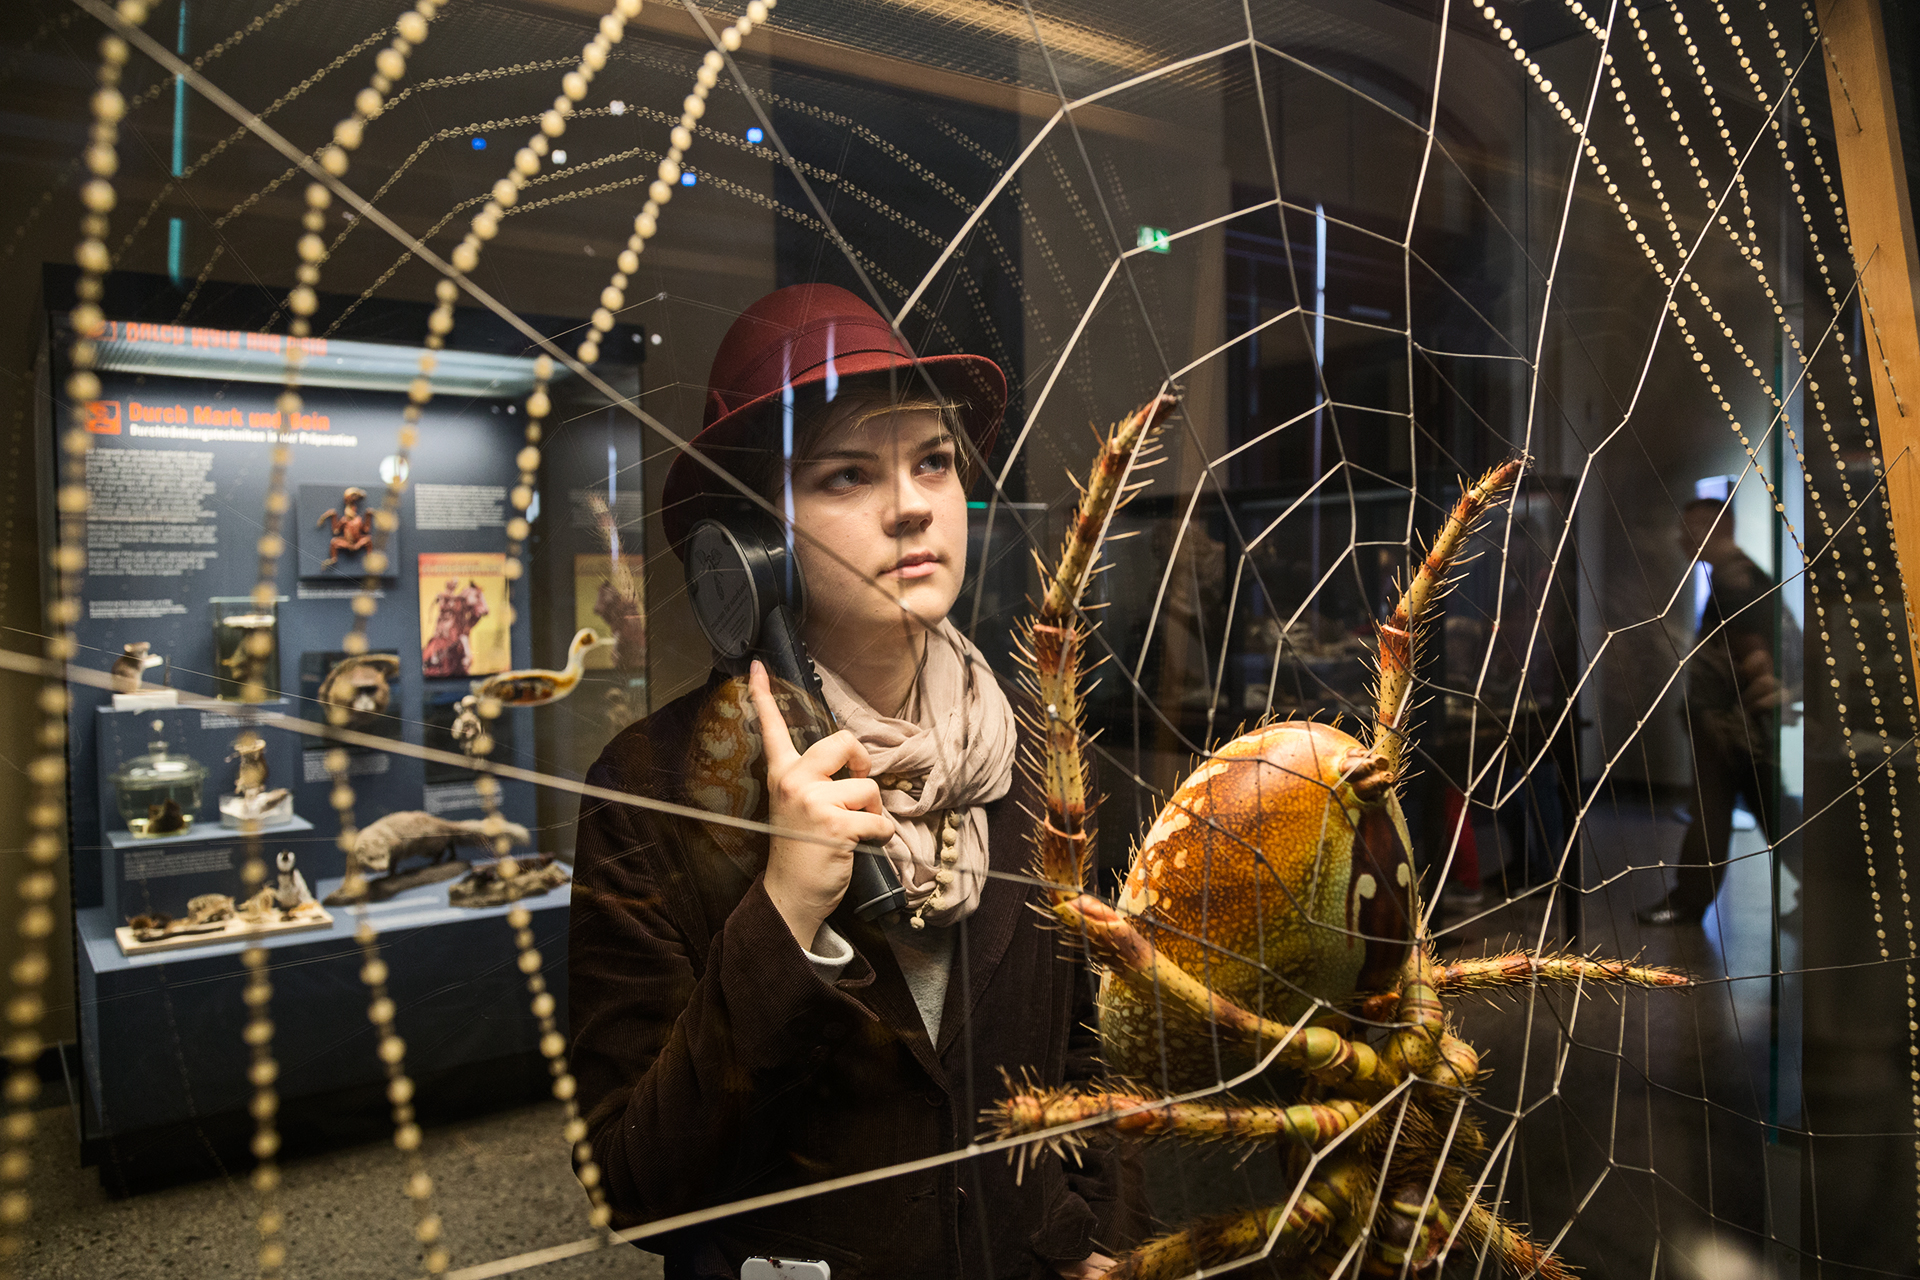  A visitor to the museum looks at an enlarged model of a spider.  Berlin, Germany.  